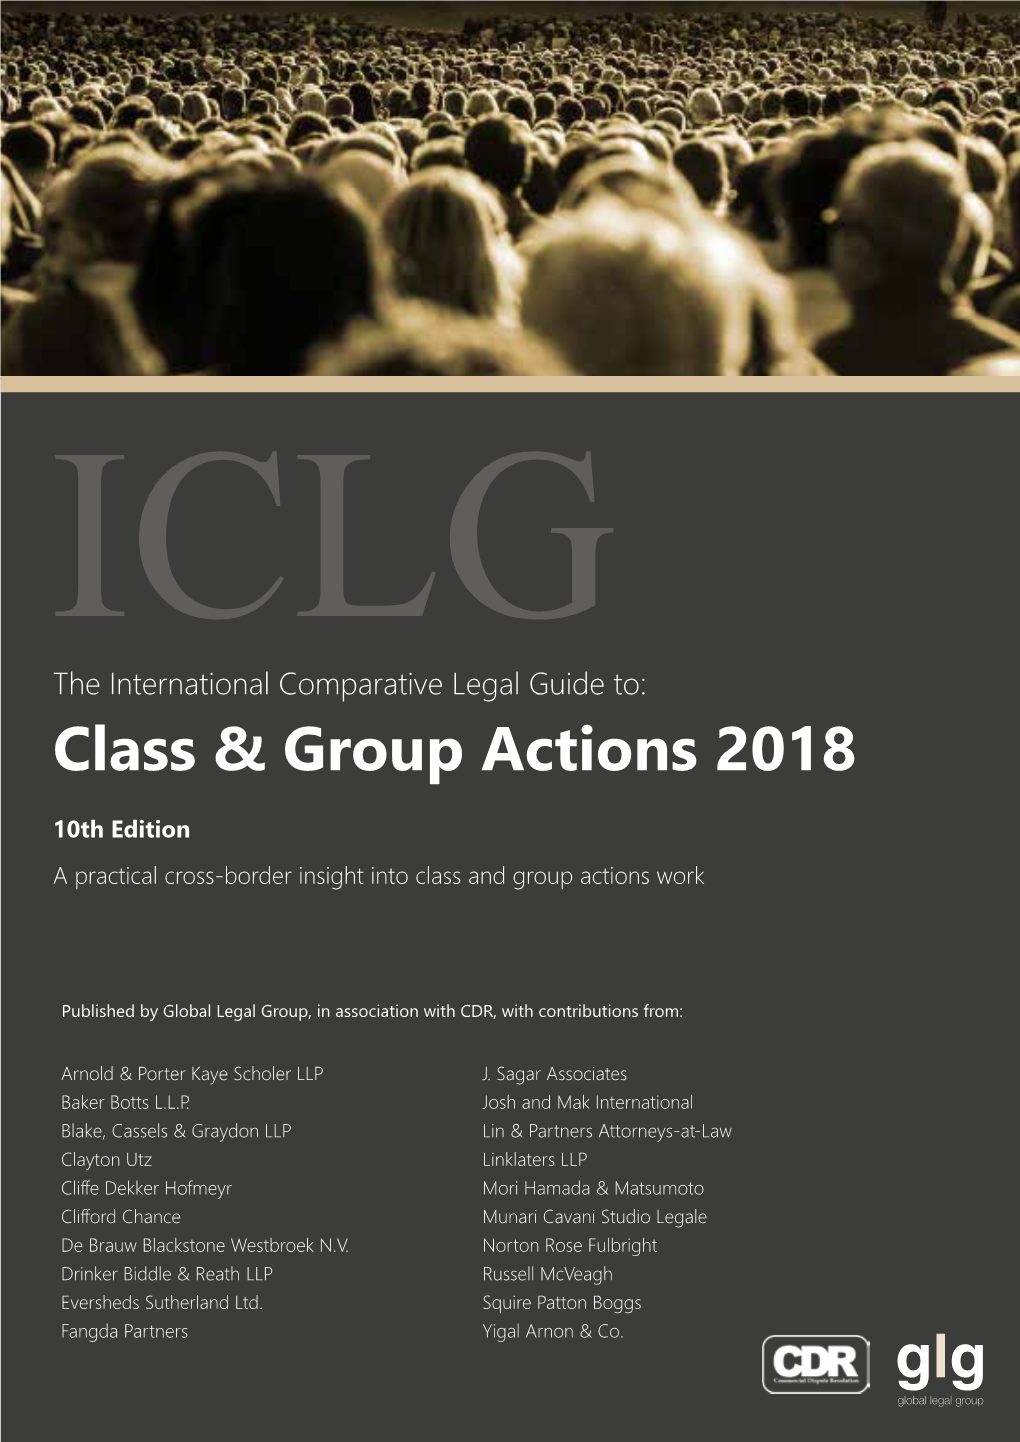 Class & Group Actions 2018